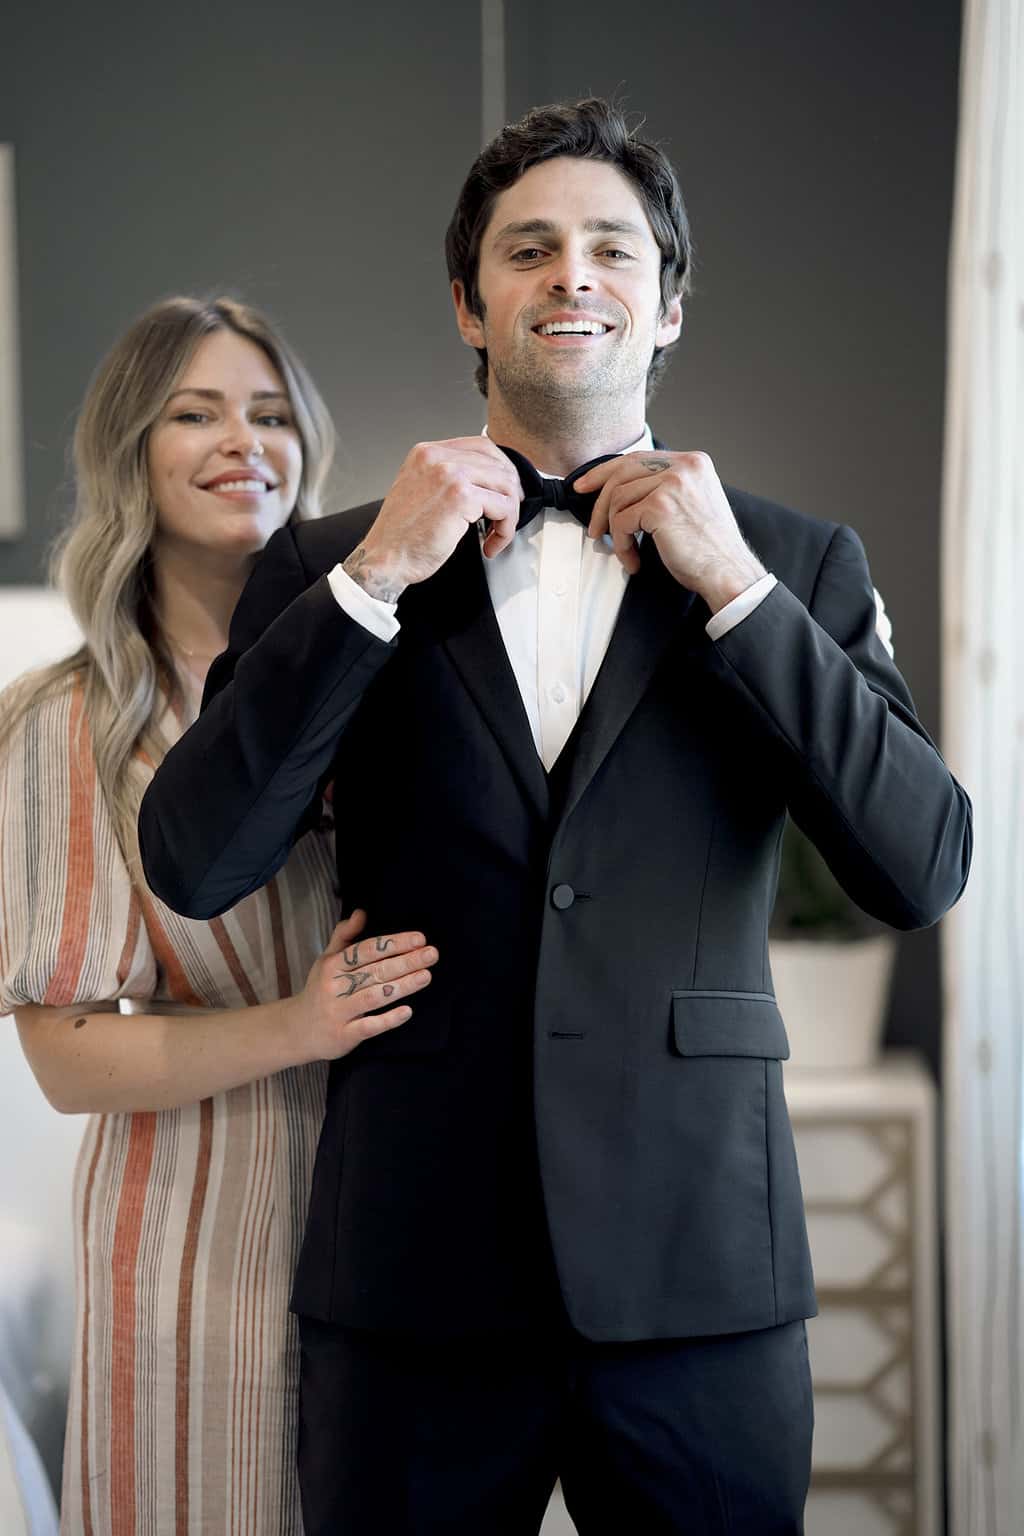 The Benefits of Renting Suits and Tuxedos Online: Convenience, Cost, and More 29